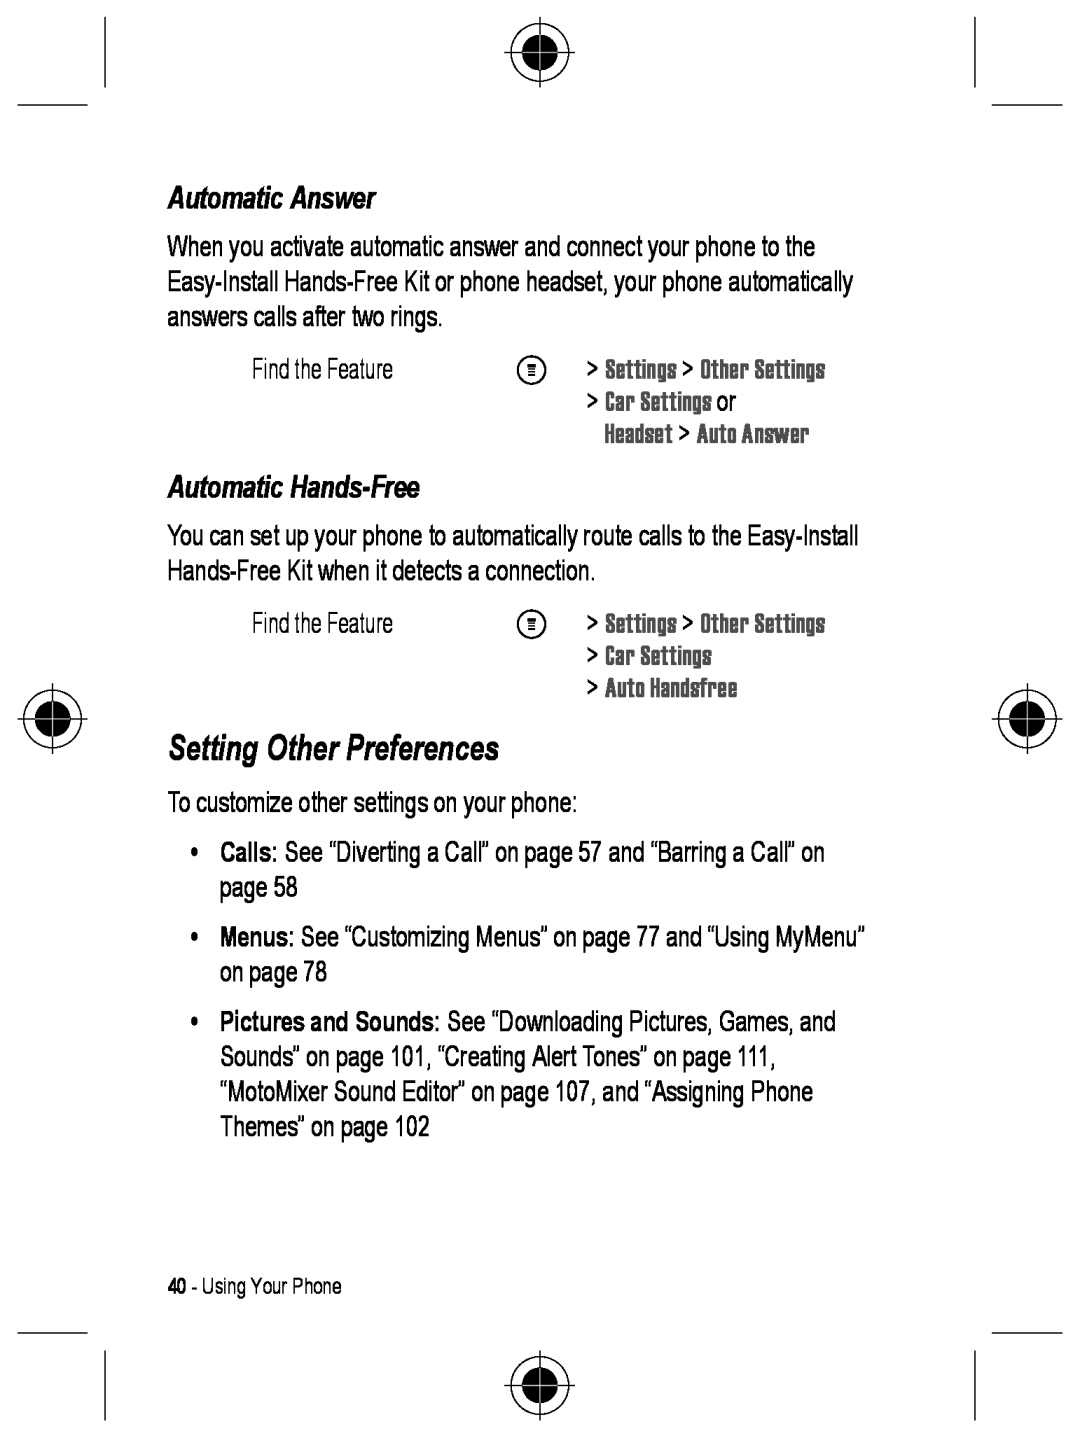 Motorola C330 Setting Other Preferences, Automatic Answer, Automatic Hands-Free, M Settings Other Settings, Car Settings 